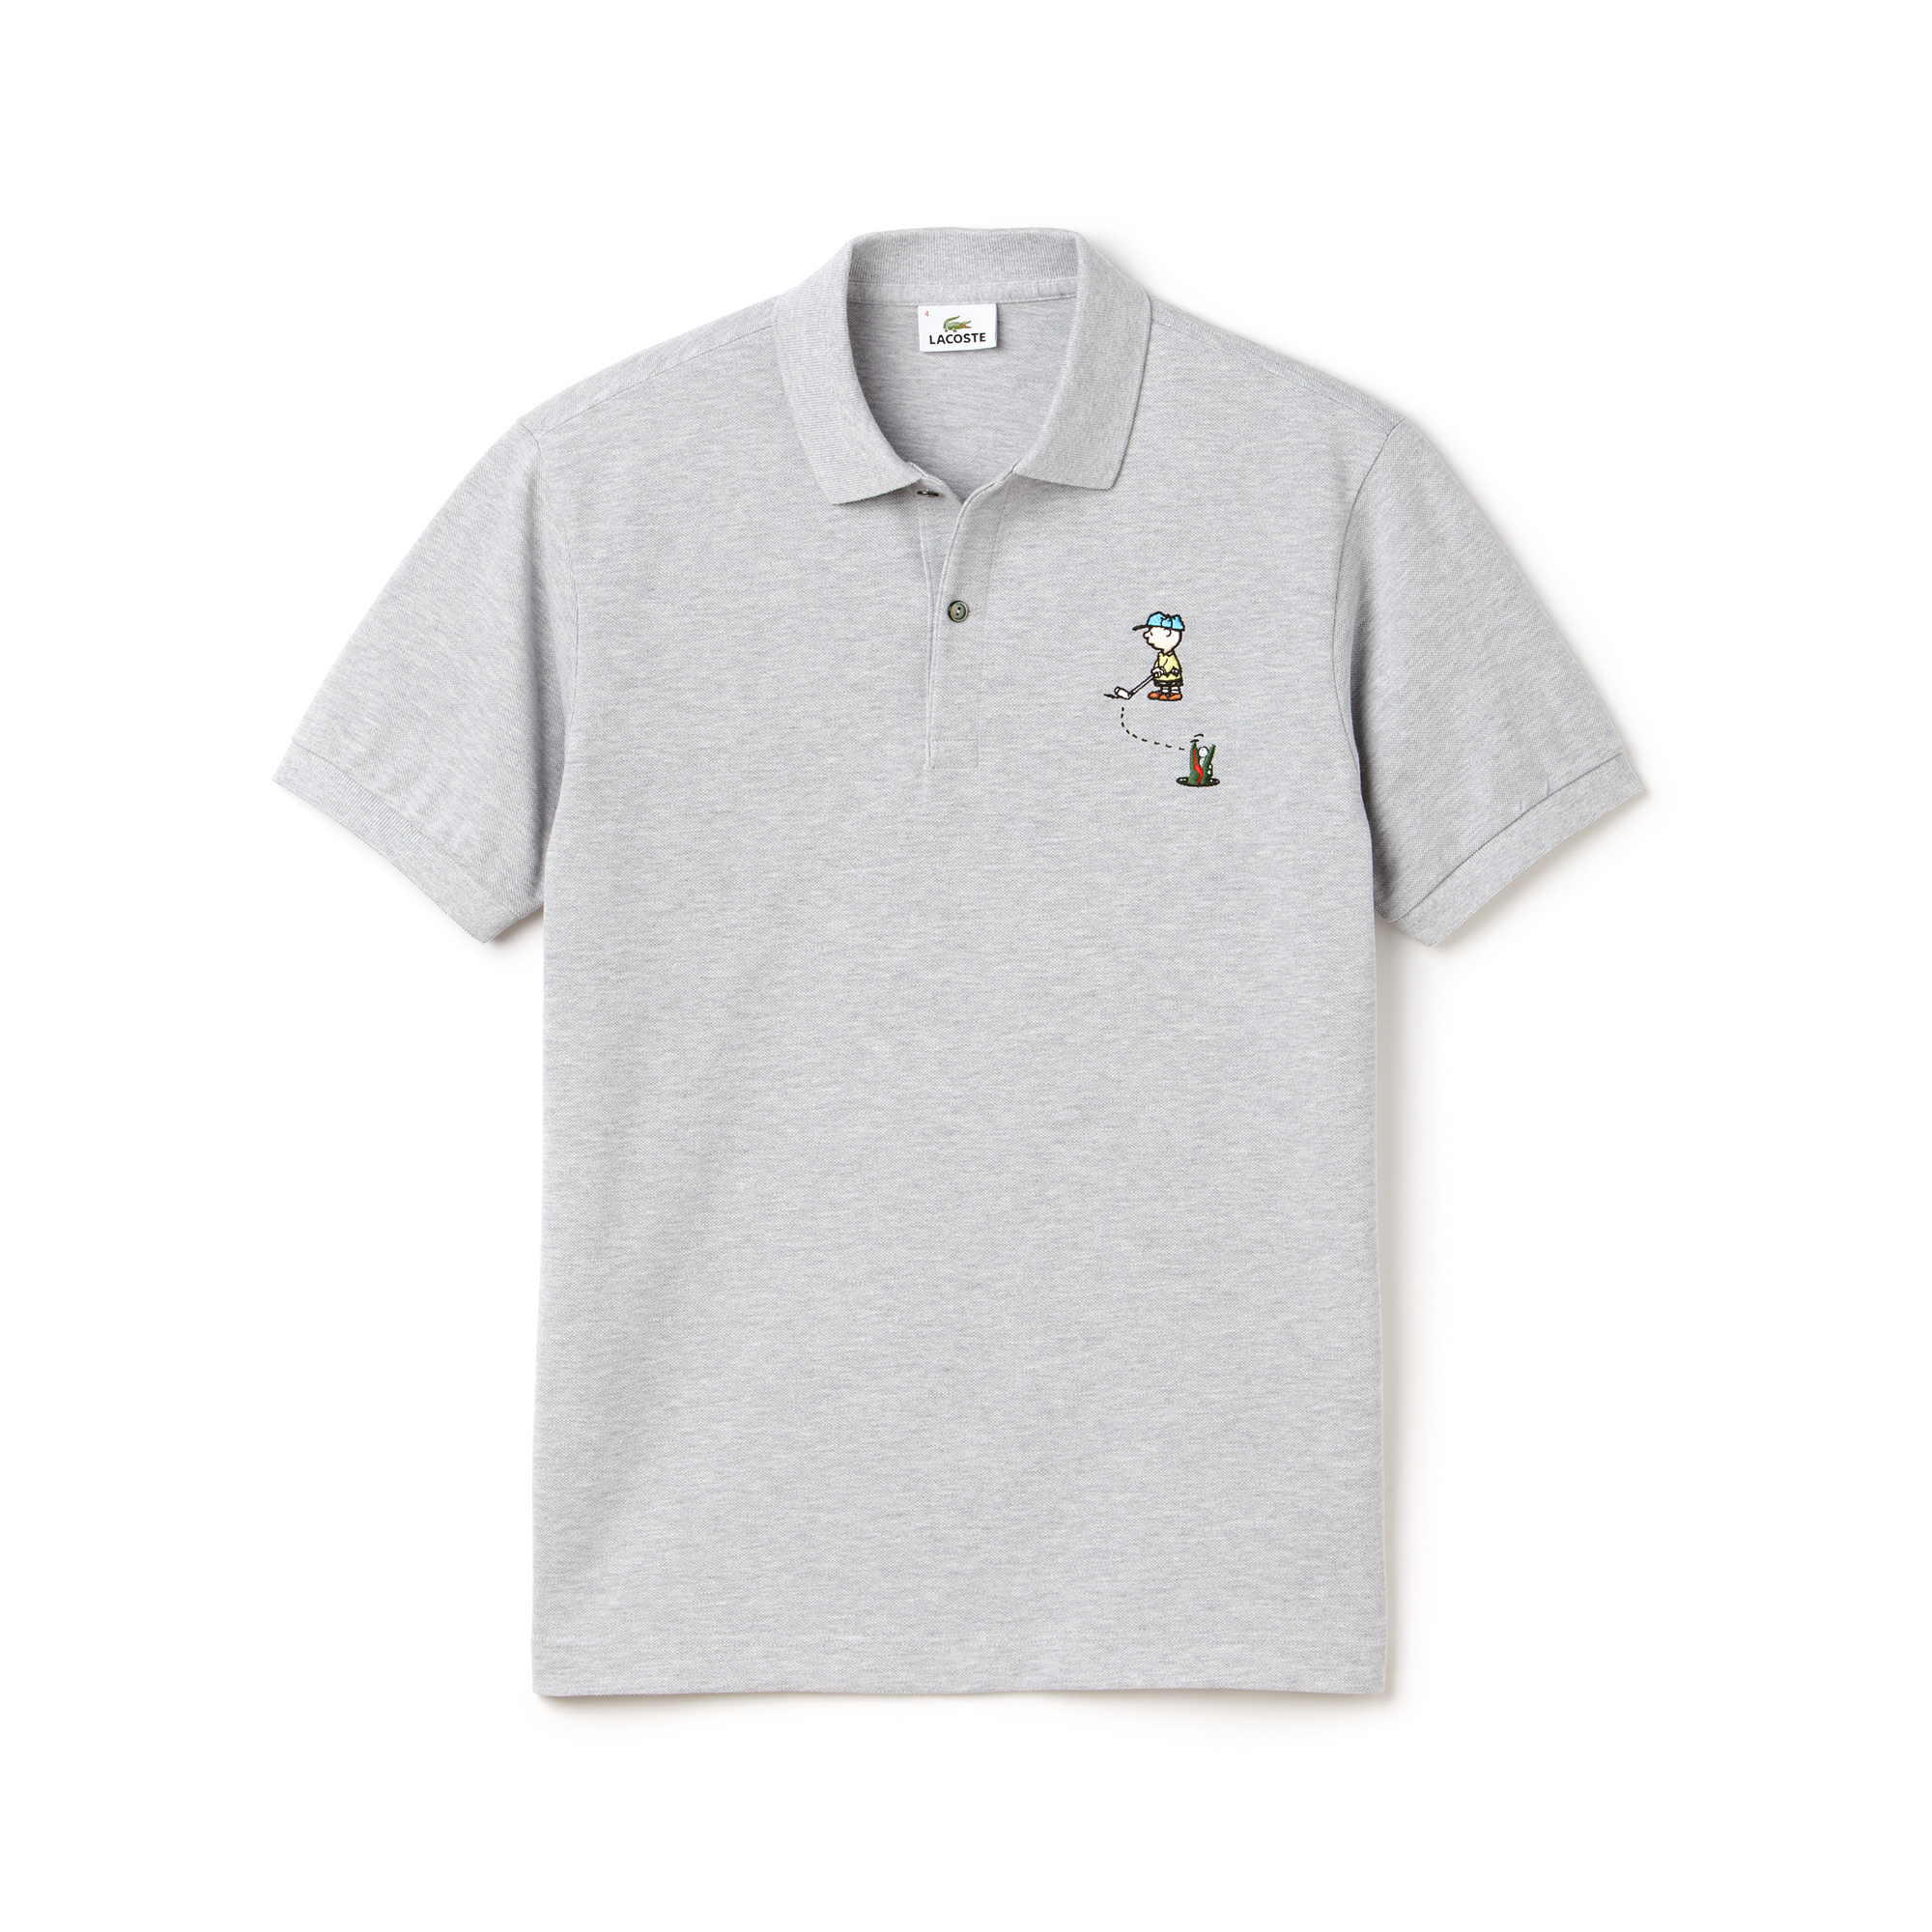 Lacoste collaborate with Snoopy and 